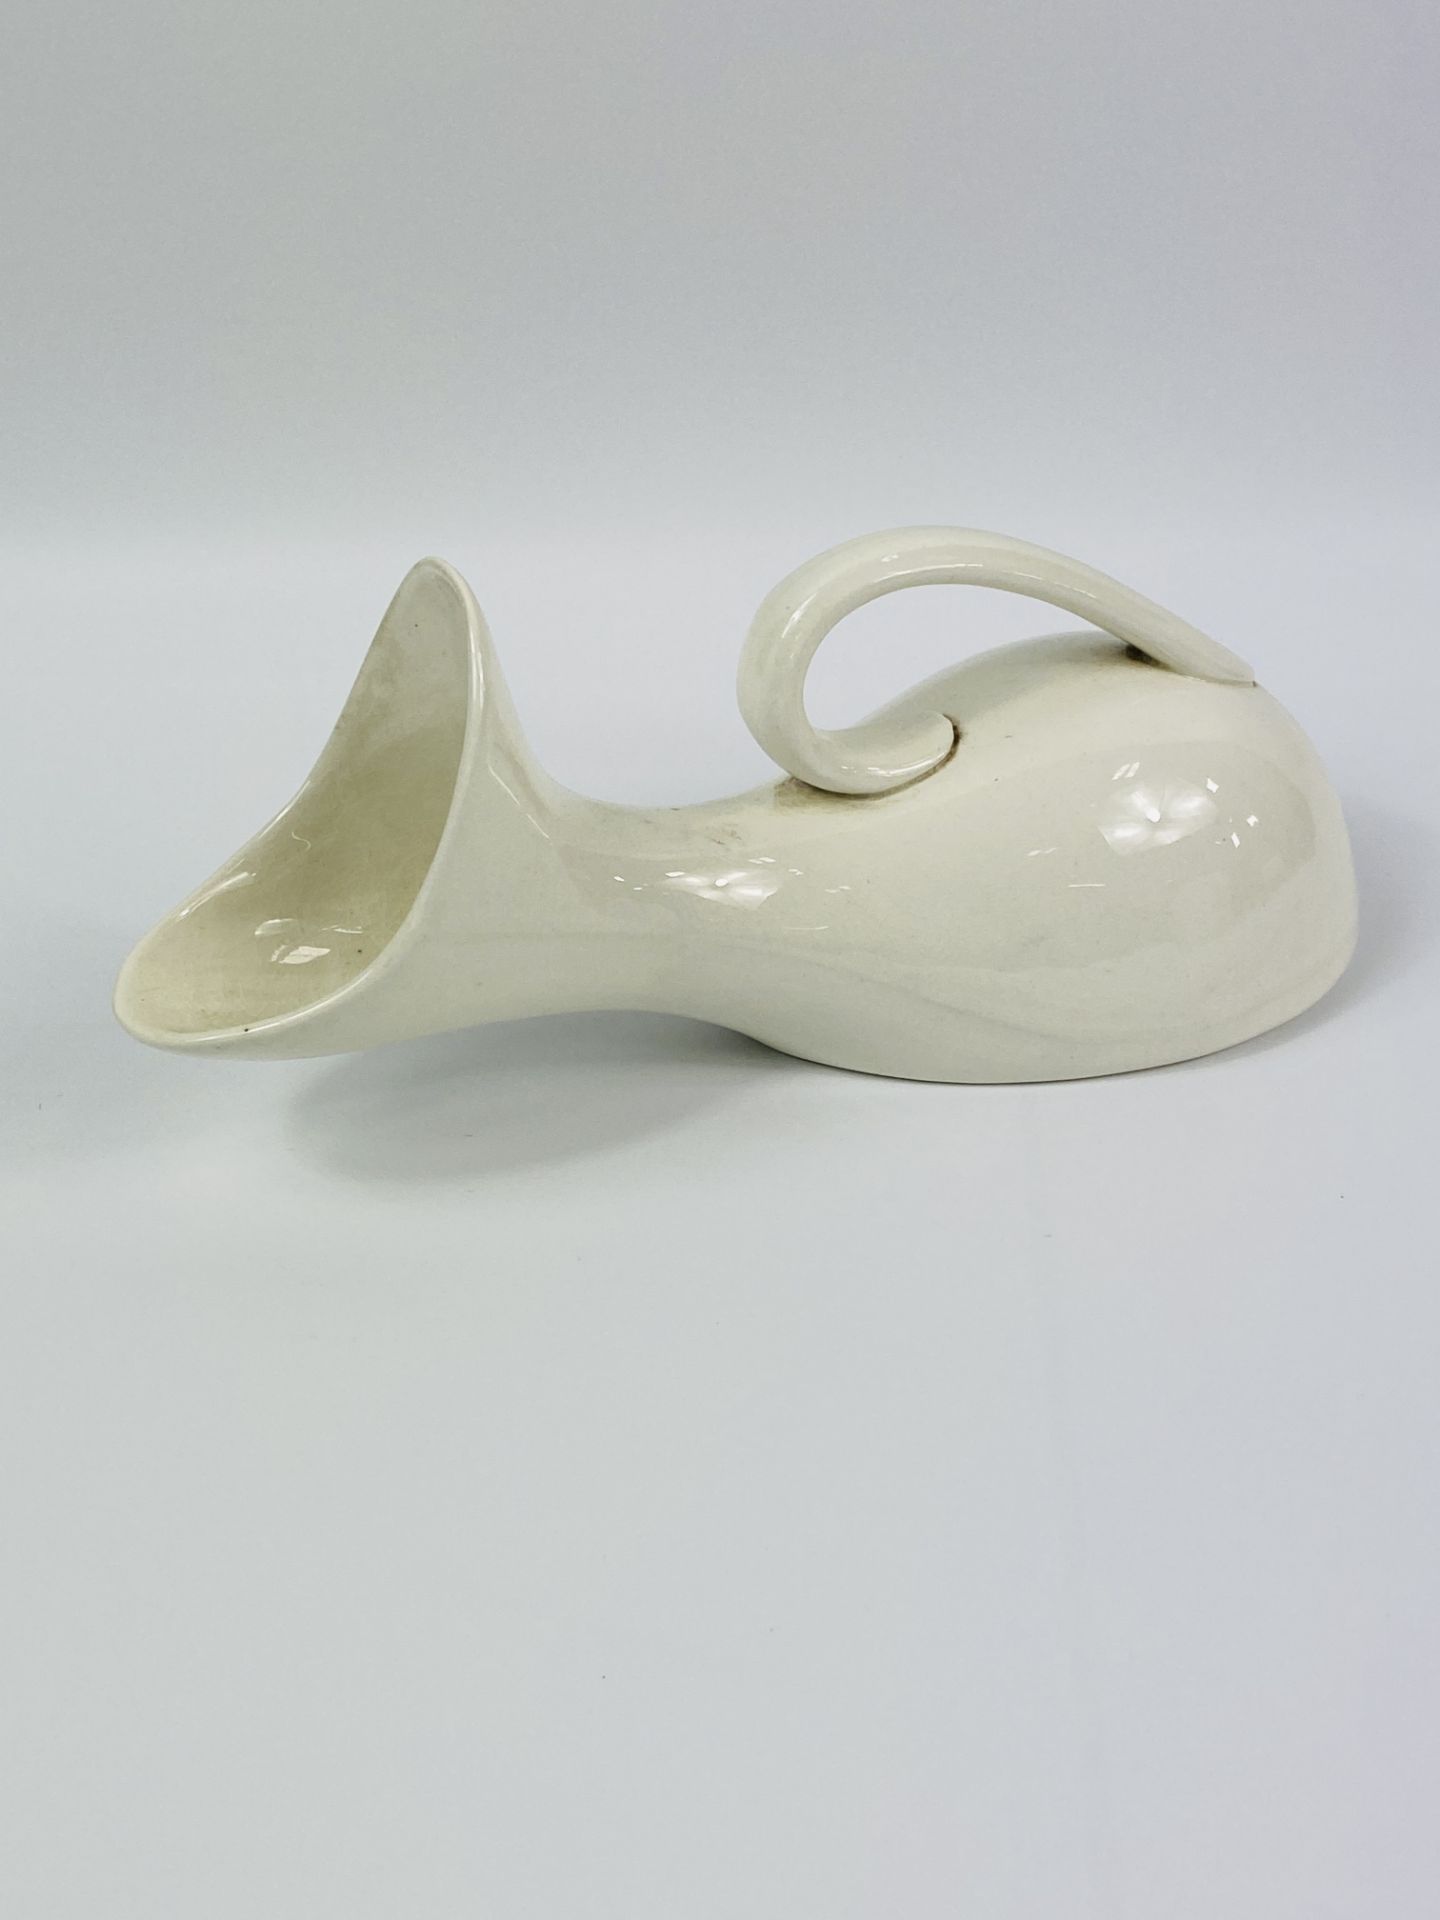 Slipper bedpan and a ceramic bed bottle - Image 4 of 6